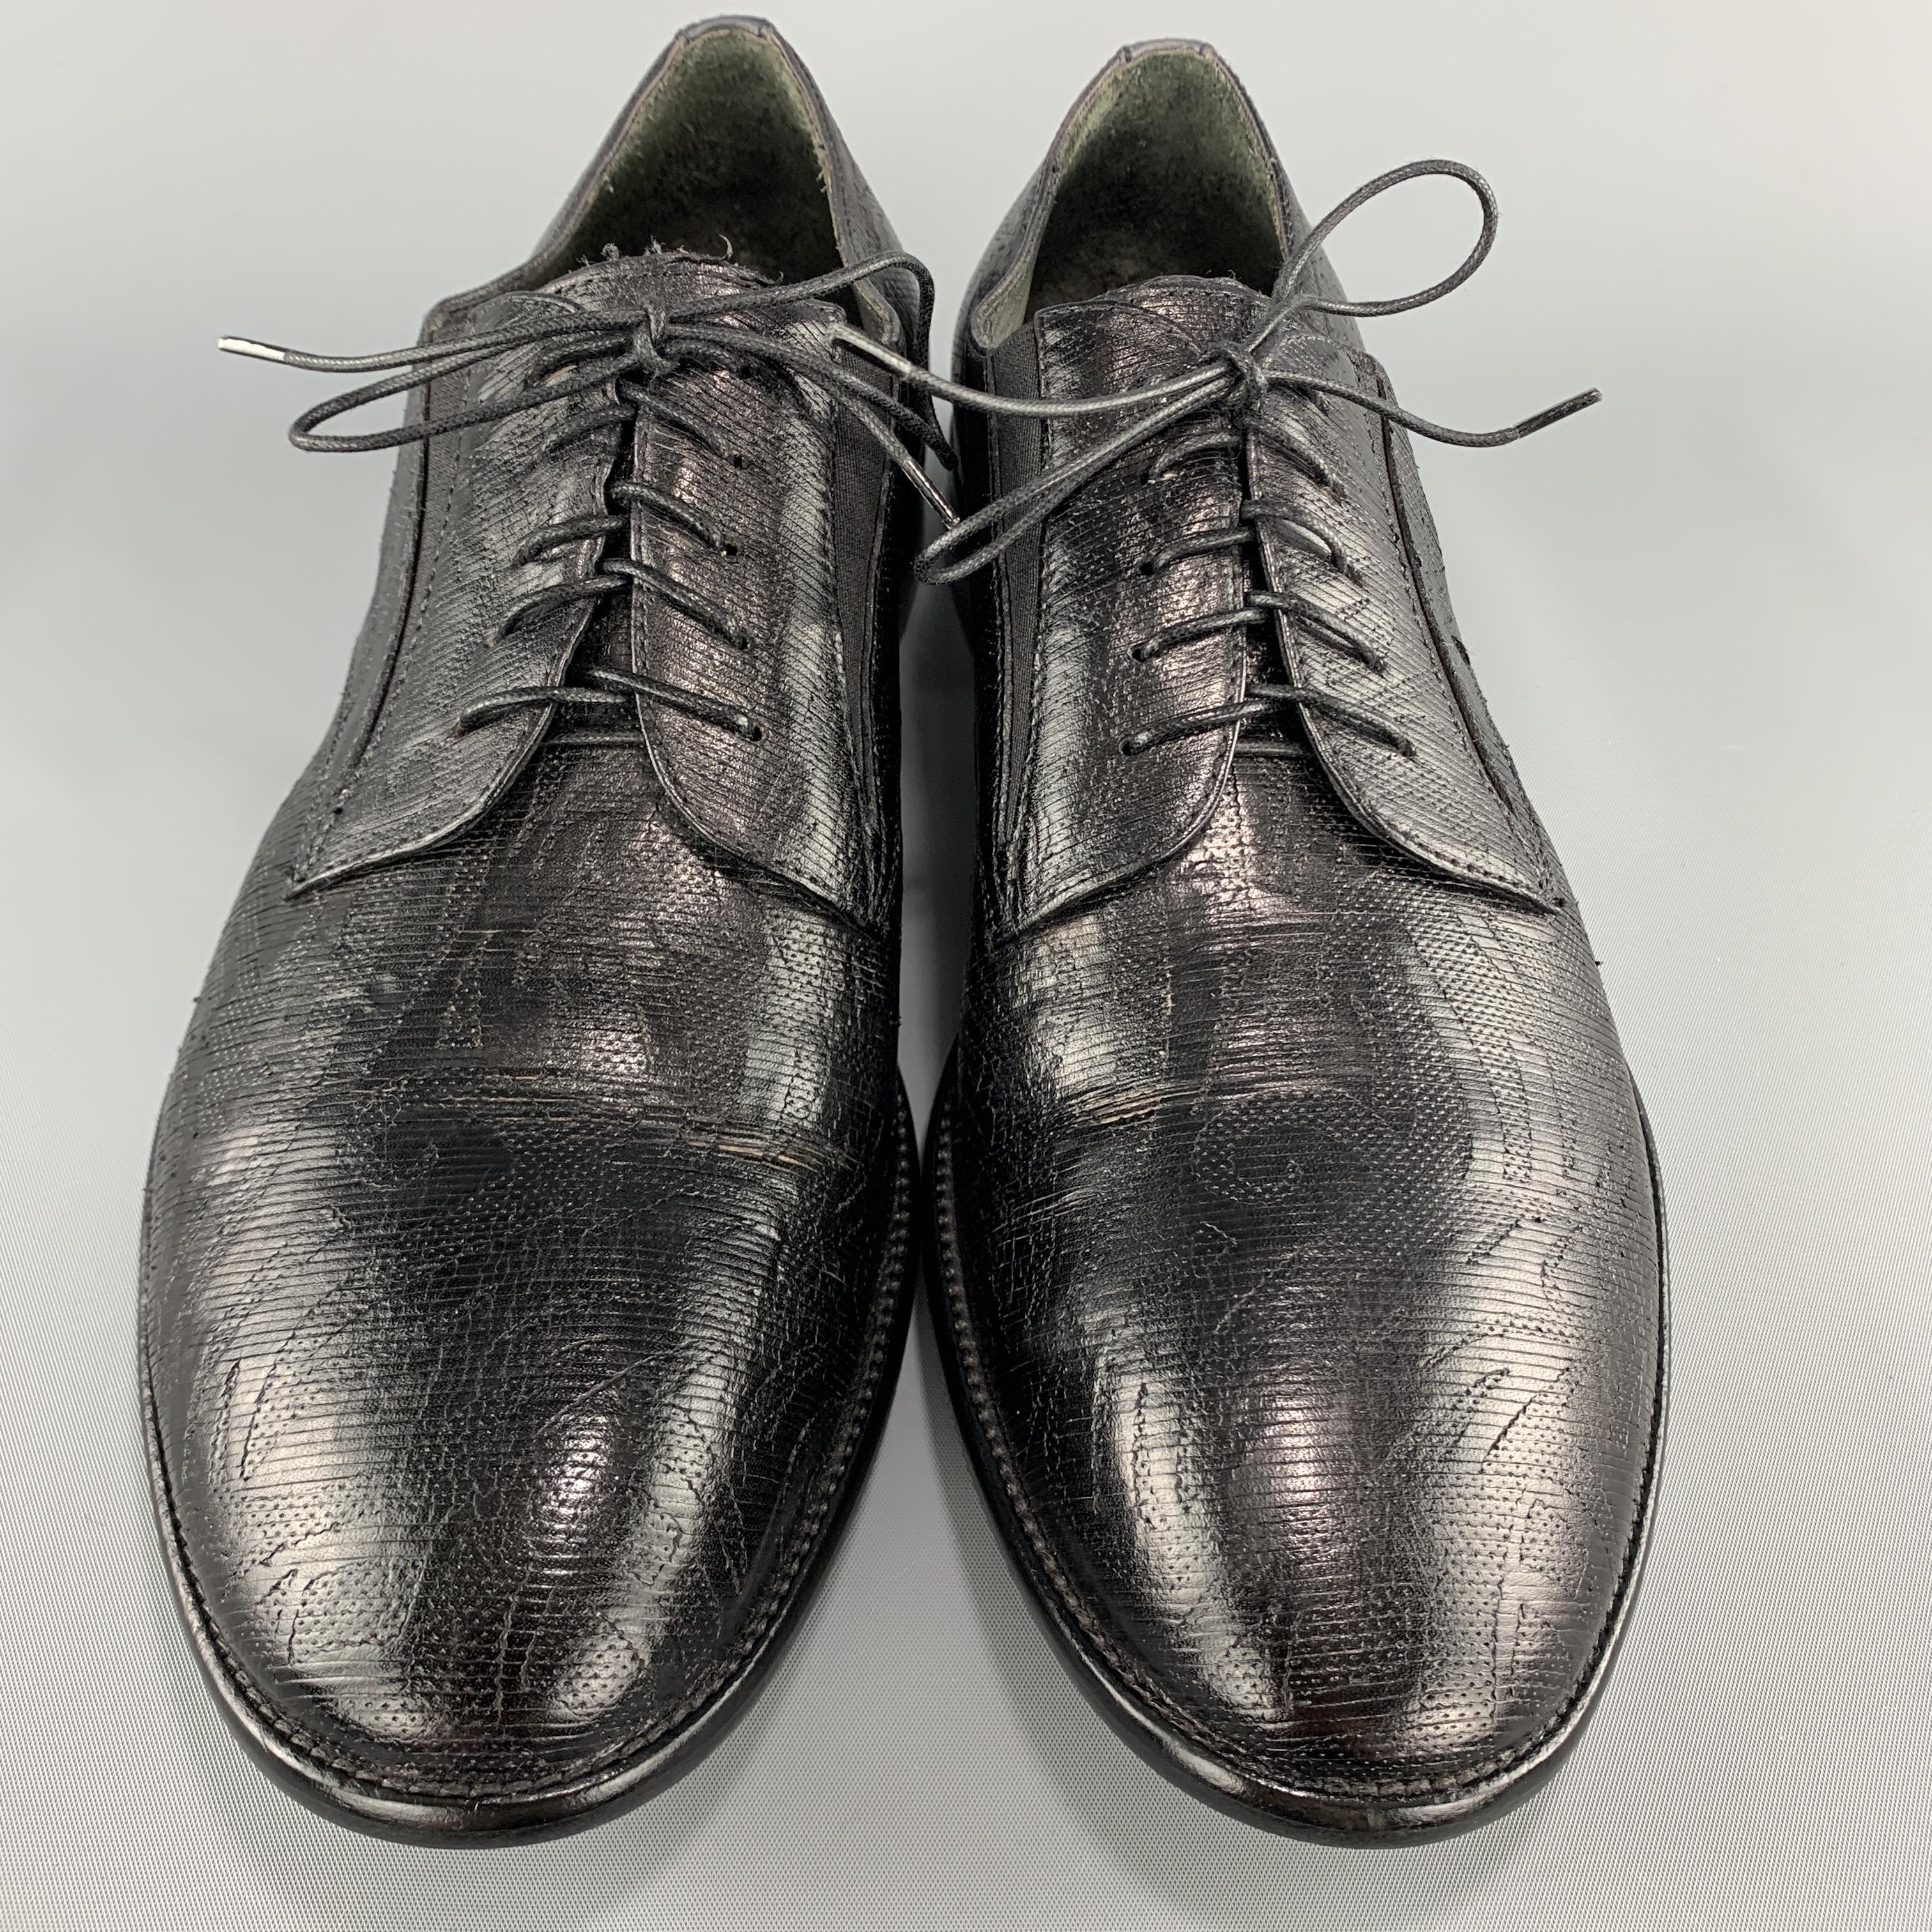 JO GHOST dress shoes come in black textured leather with a tattoo pattern throughout and stretch panels. Made in Italy..

Excellent New ith Tags.
Marked: IT 43

Outsole: 12.25 x 4.25 in.